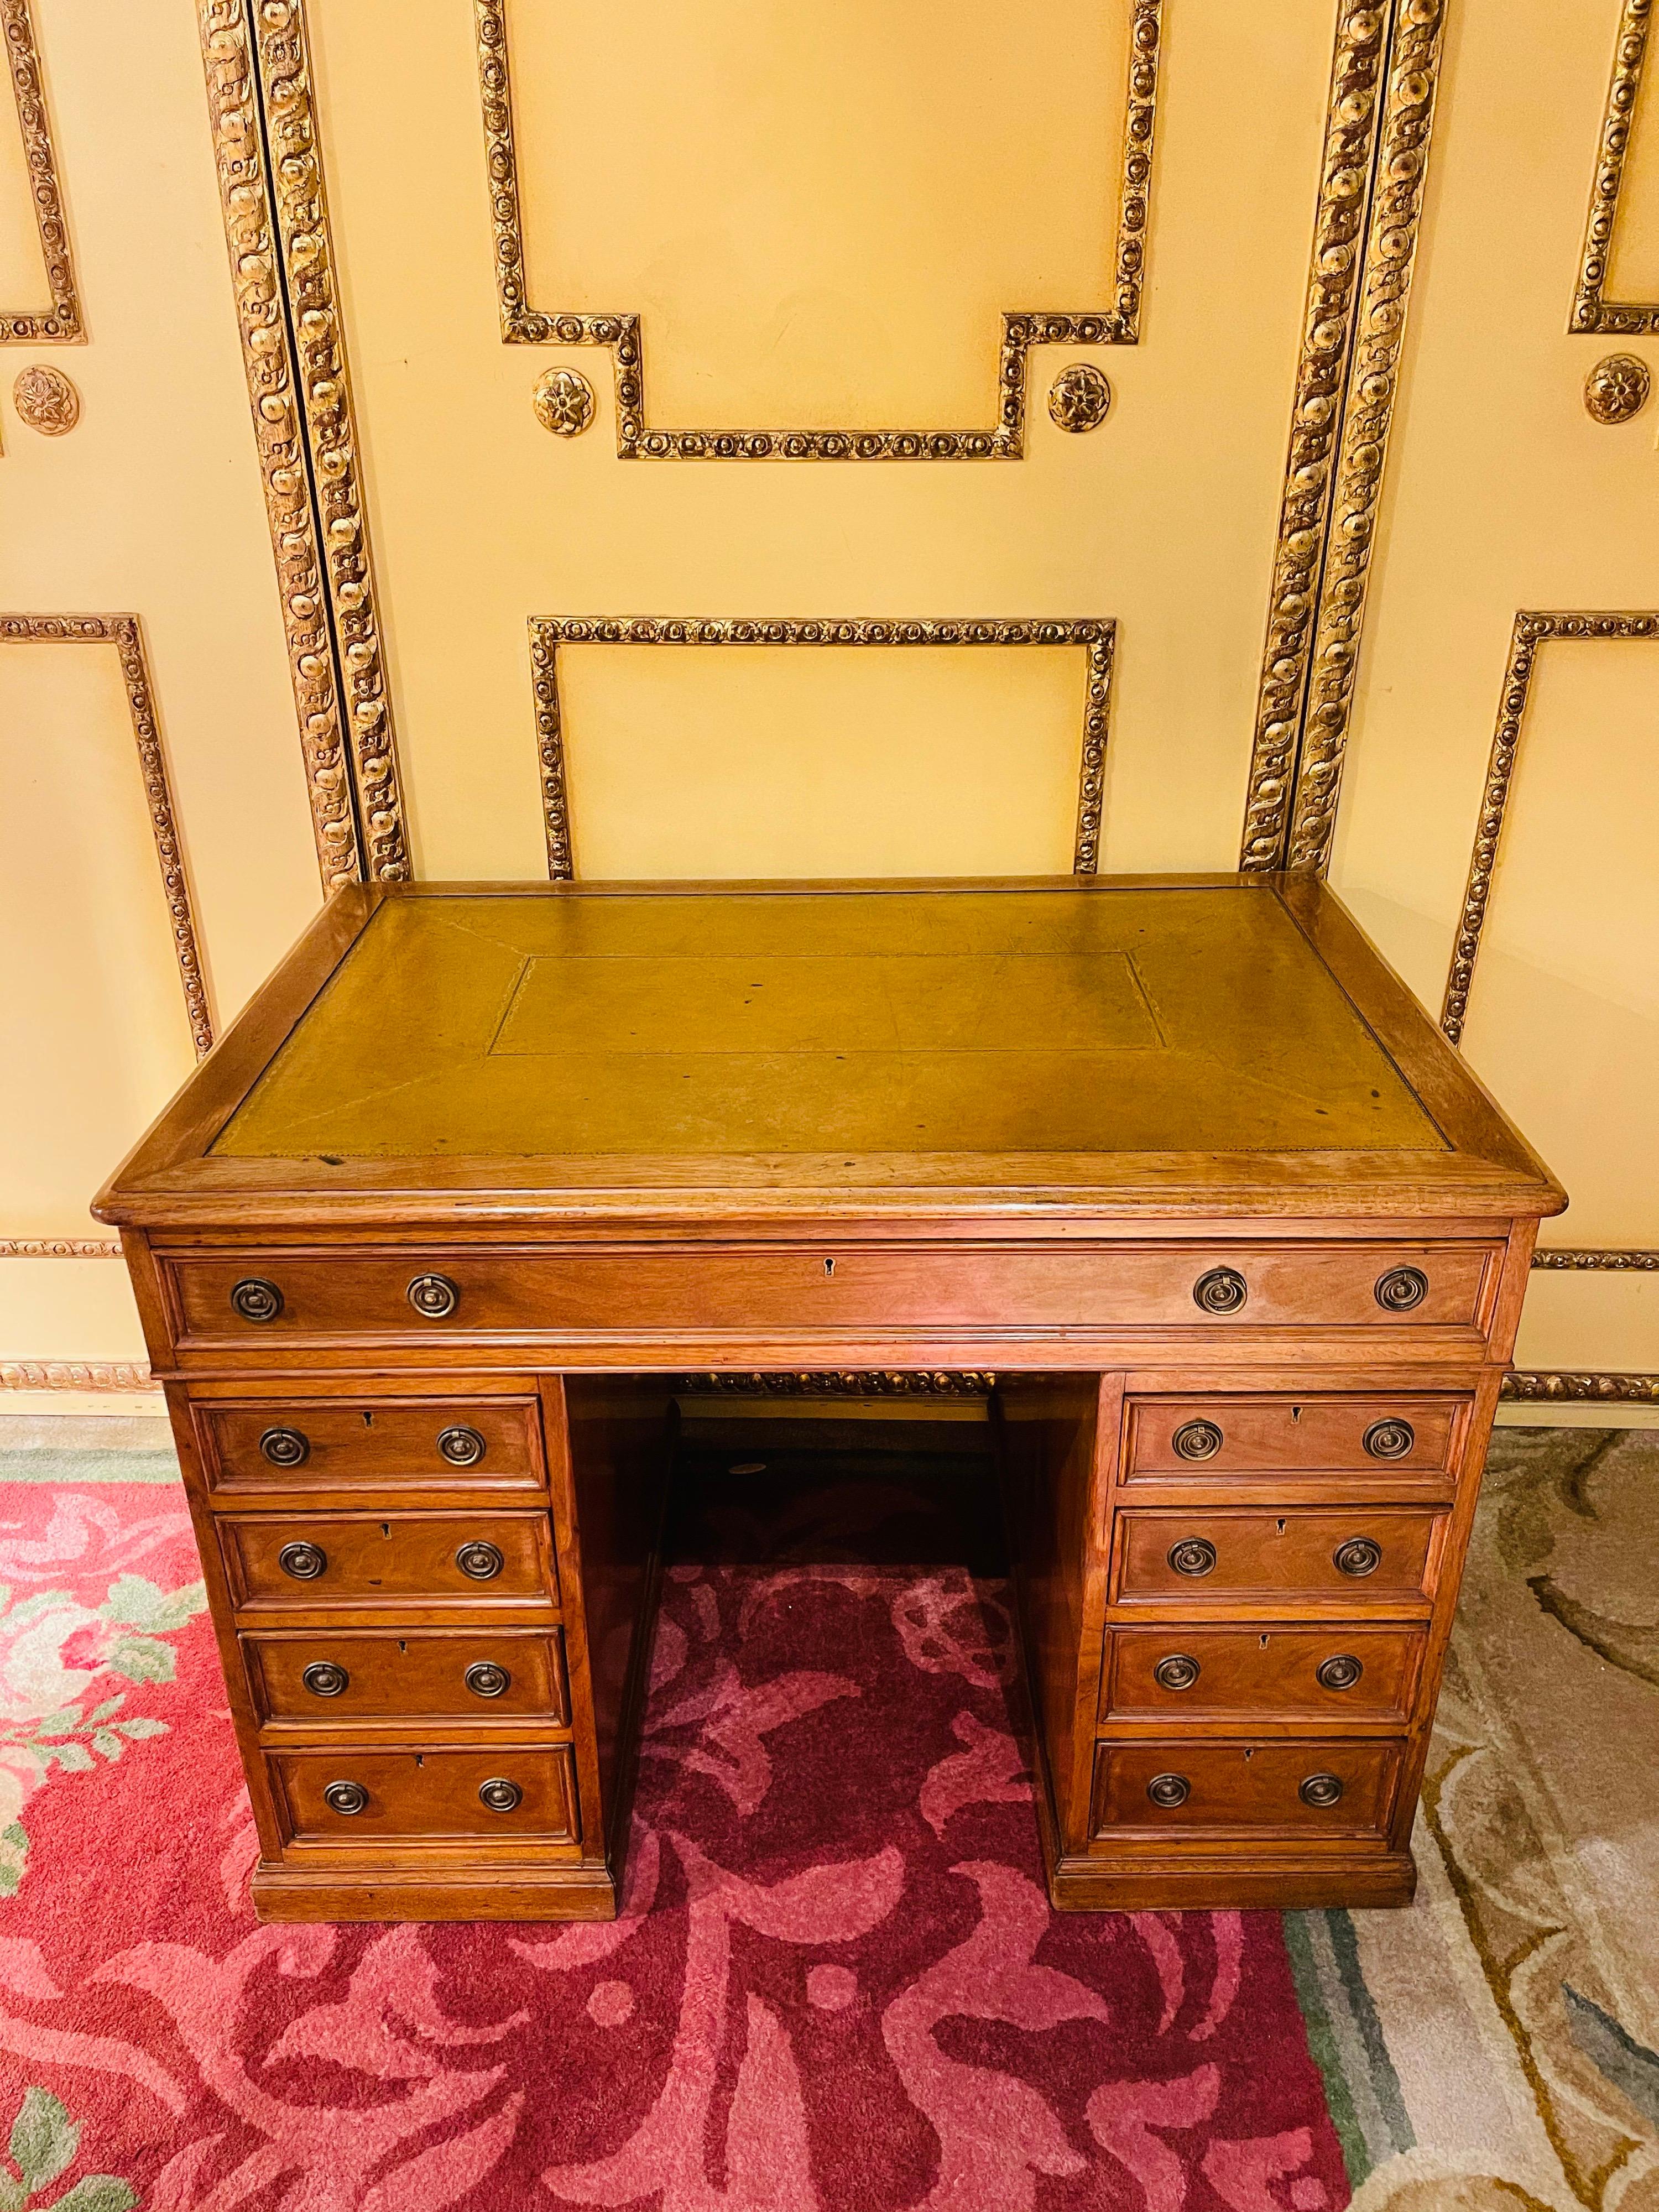 Beautiful English desk, light mahogany 19th century

Classic English desk with real leather top. 3 parts - writing surface + 2 drawer containers. Solid wood made of light mahogany and high quality workmanship. 

The desk has a lot of storage